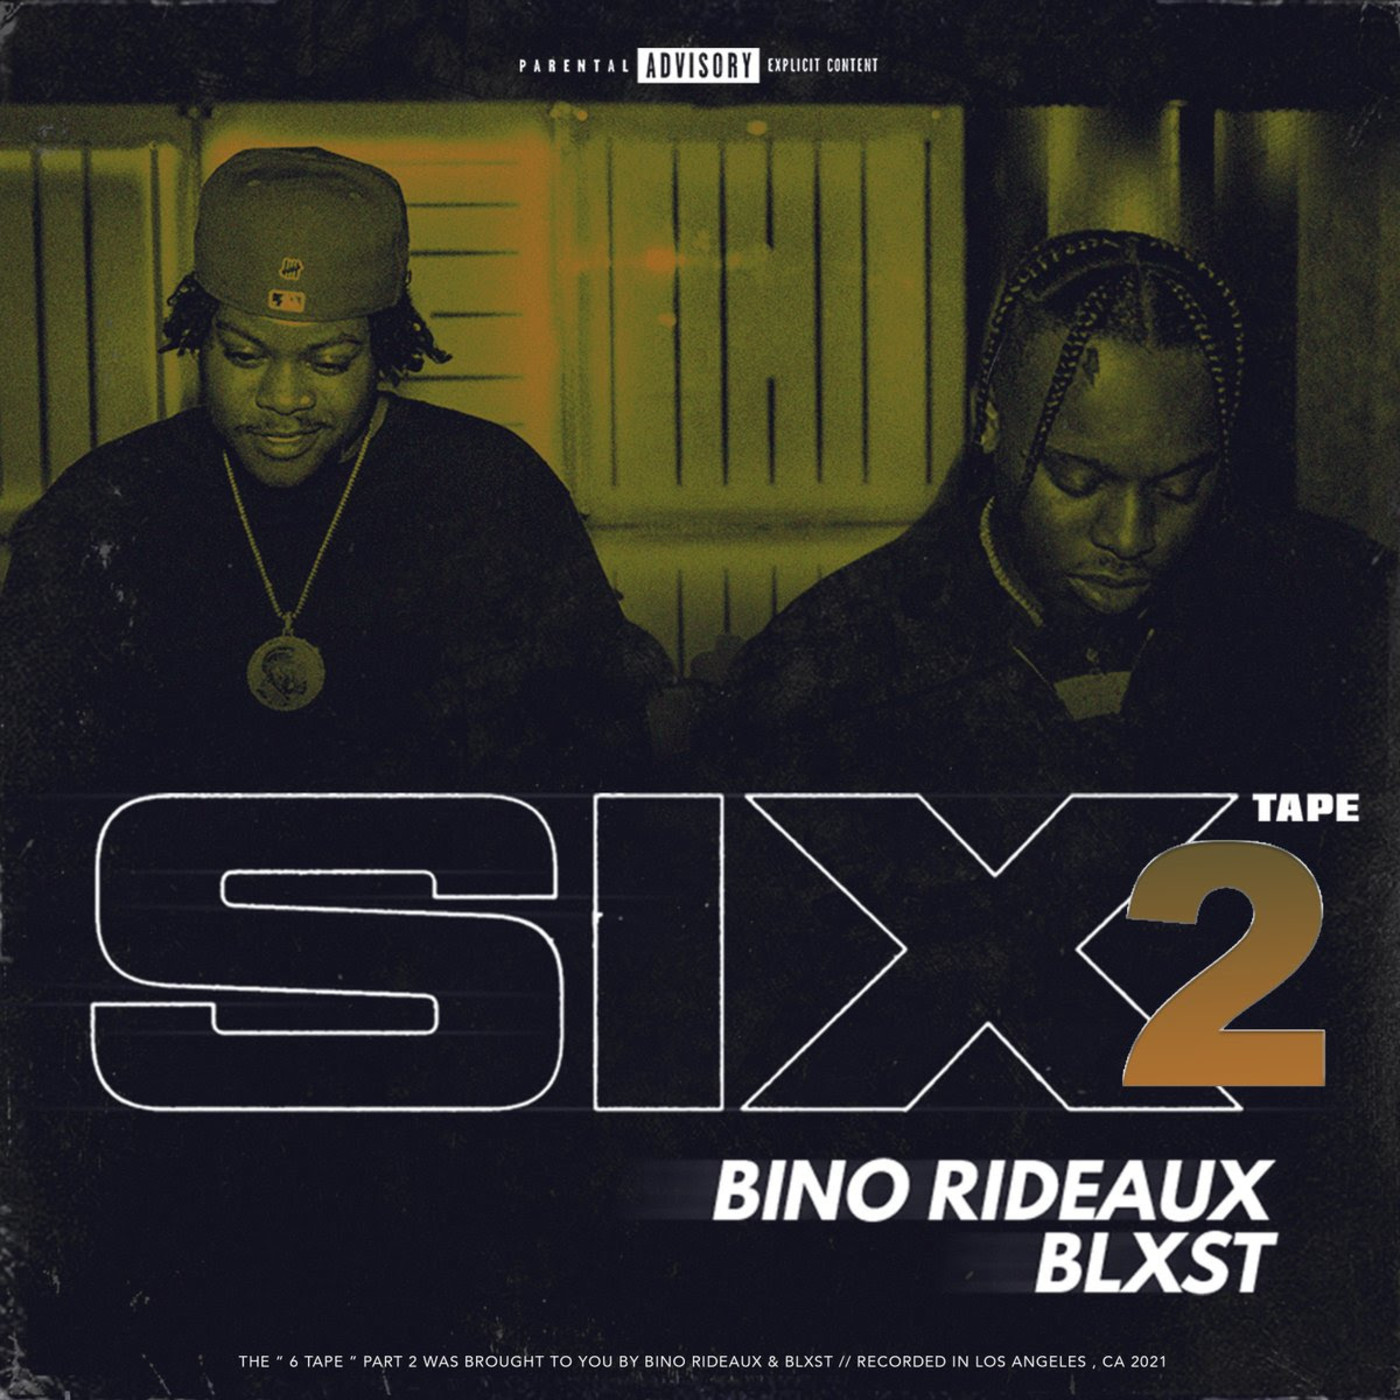 Blxst and Bino Rideaux Drop New Project 'Sixtape 2' | Complex